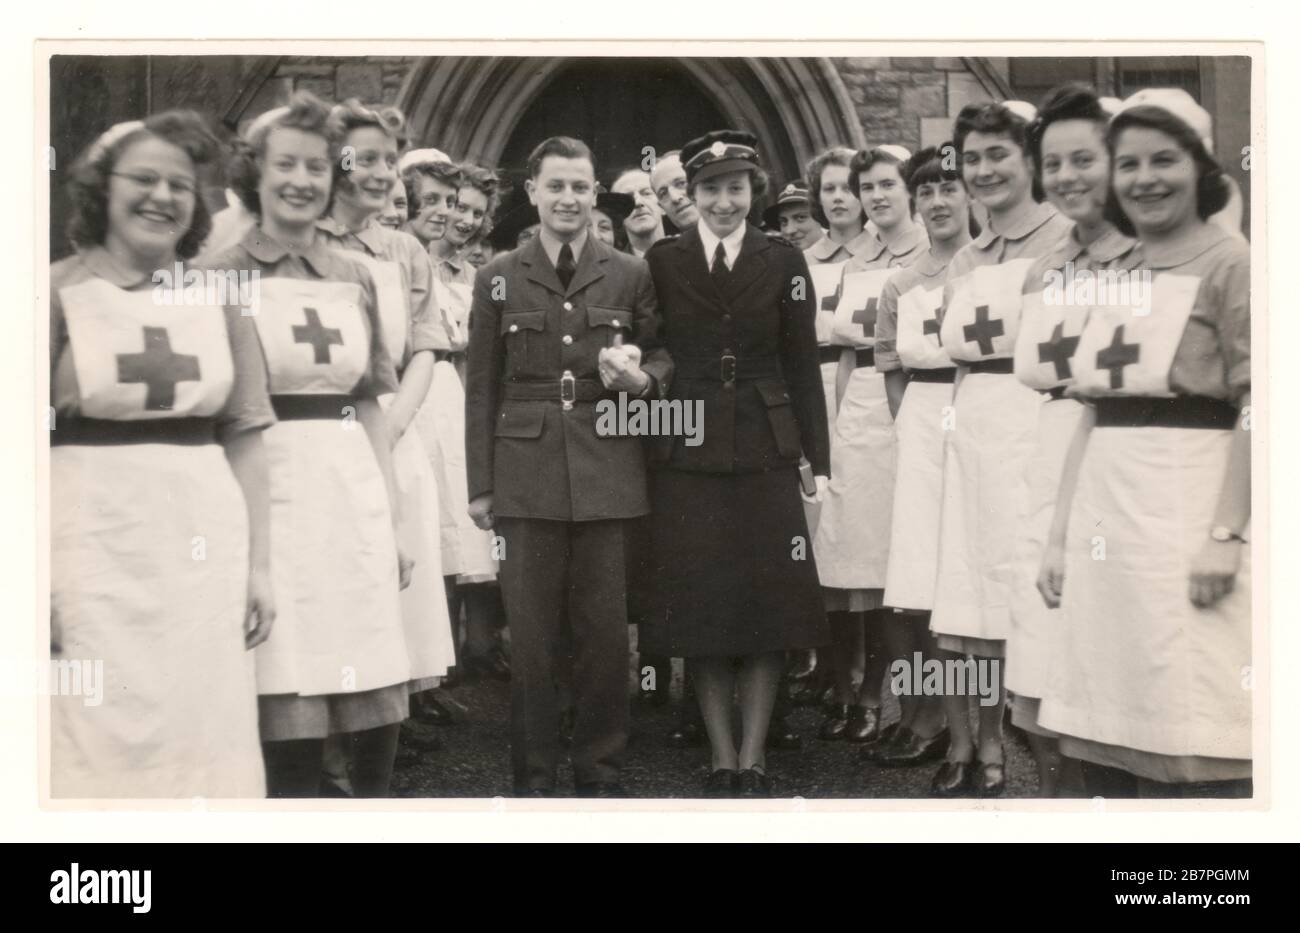 WW2 era photo of happy attractive British Red Cross military nurse officer VAD in service uniform wearing a British Red Cross Society cap badge, on a cap -  marrying an RAF airman, Bristol, England, U.K. dated January 1944 Stock Photo